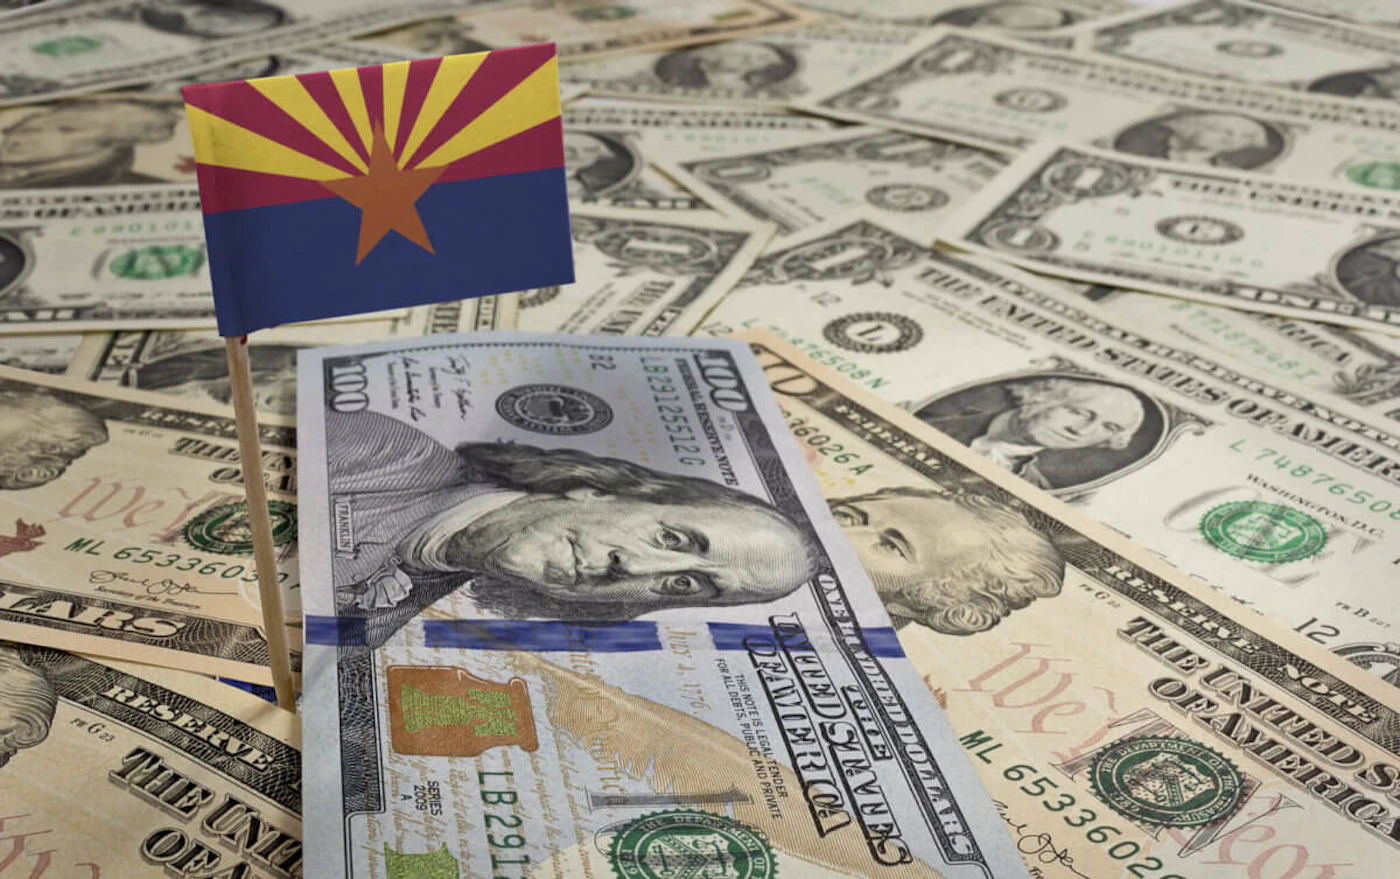 100 dollar bill on top of fanned out one dollar bills with an AZ state flag on top